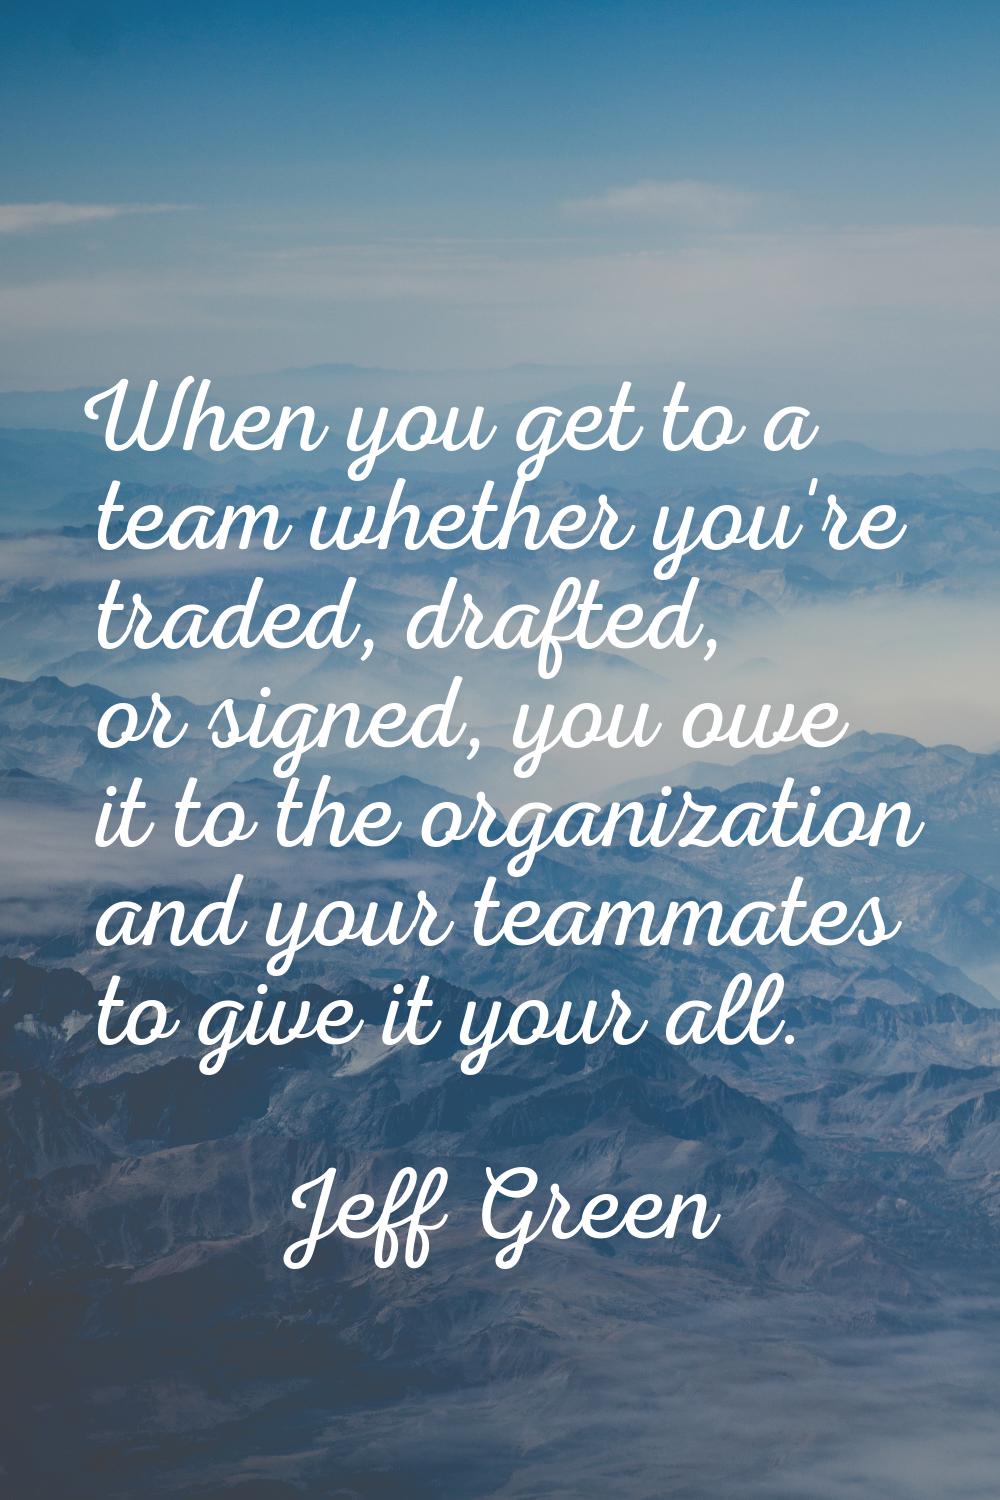 When you get to a team whether you're traded, drafted, or signed, you owe it to the organization an